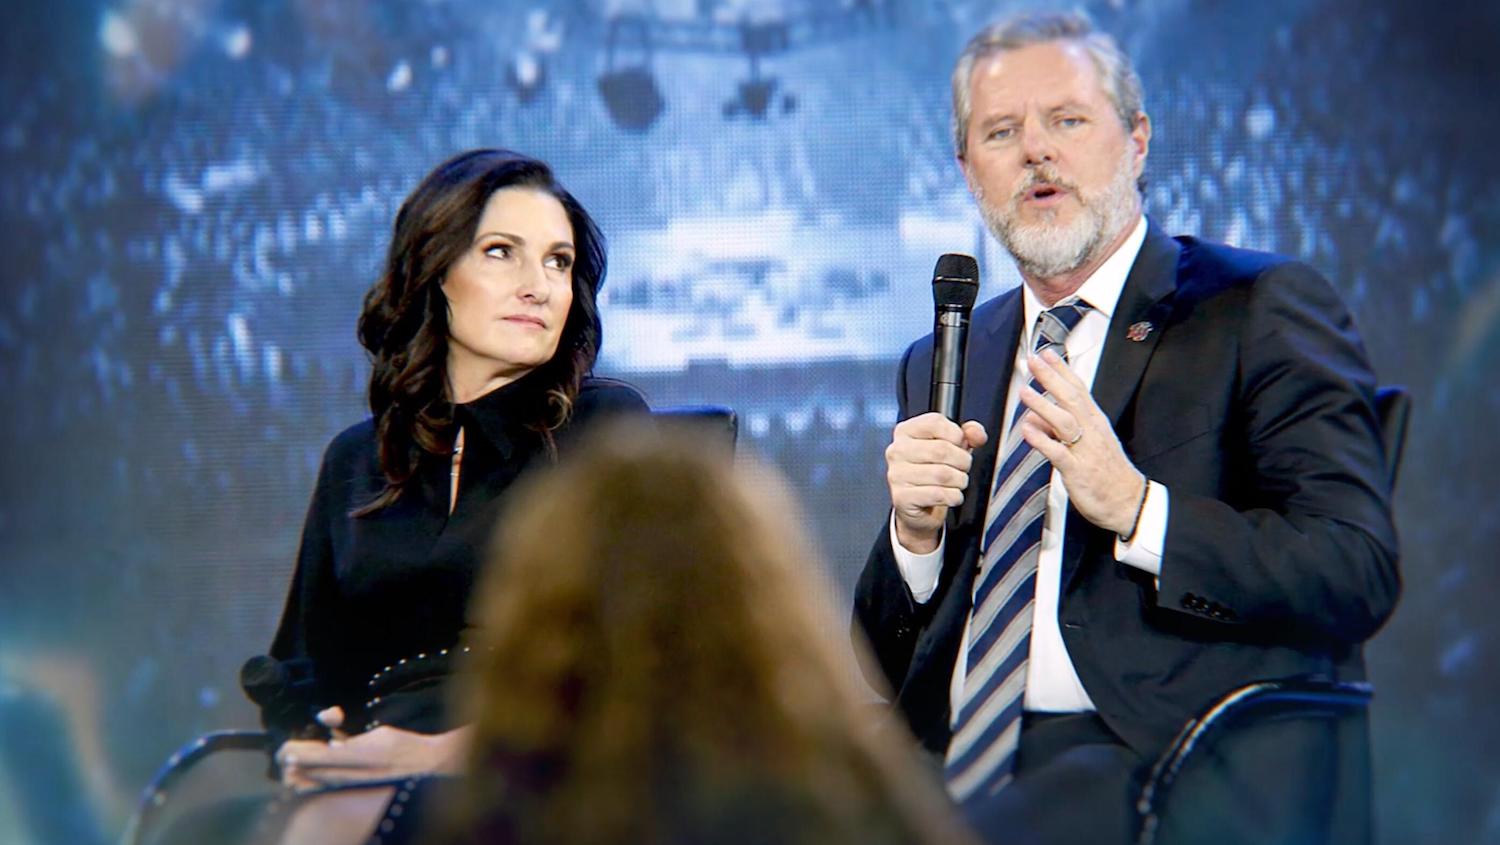 Jerry Falwell Jr.'s wife, Becki Falwell, sits next to him on stage.